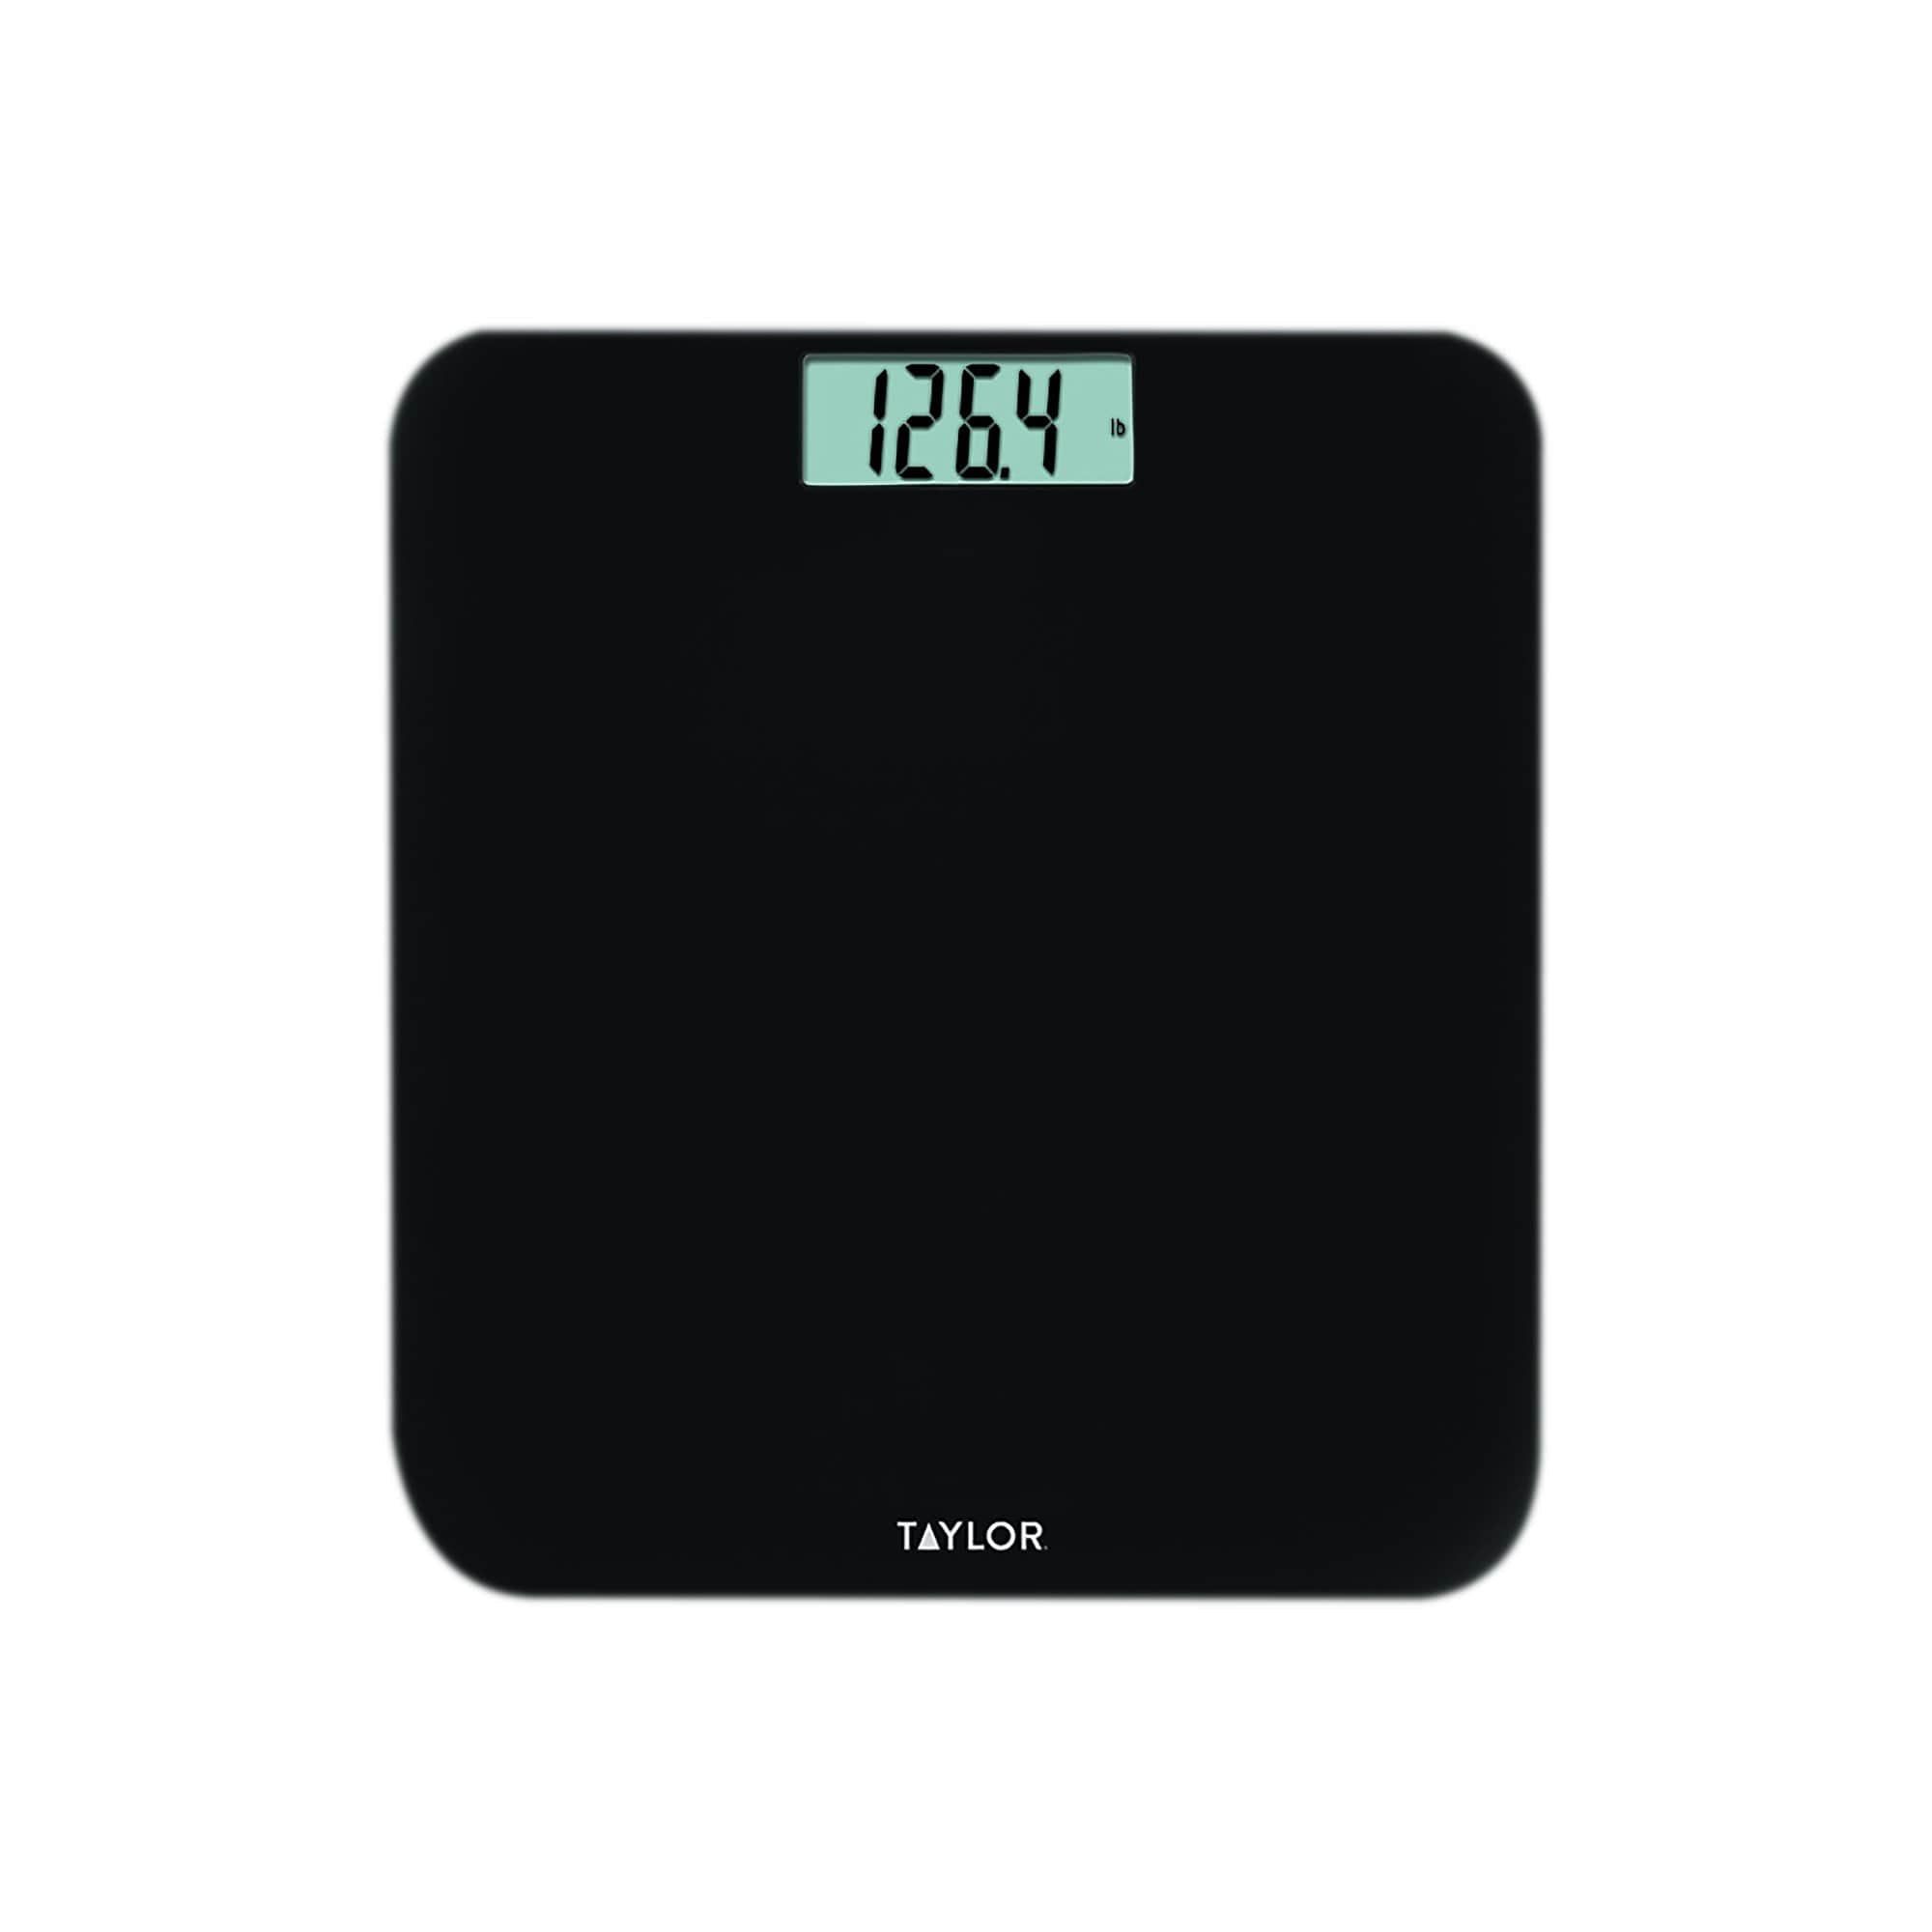 Digital Bathroom Scale Body Weight Scales 400 lbs Ultra Slim Most Accurate